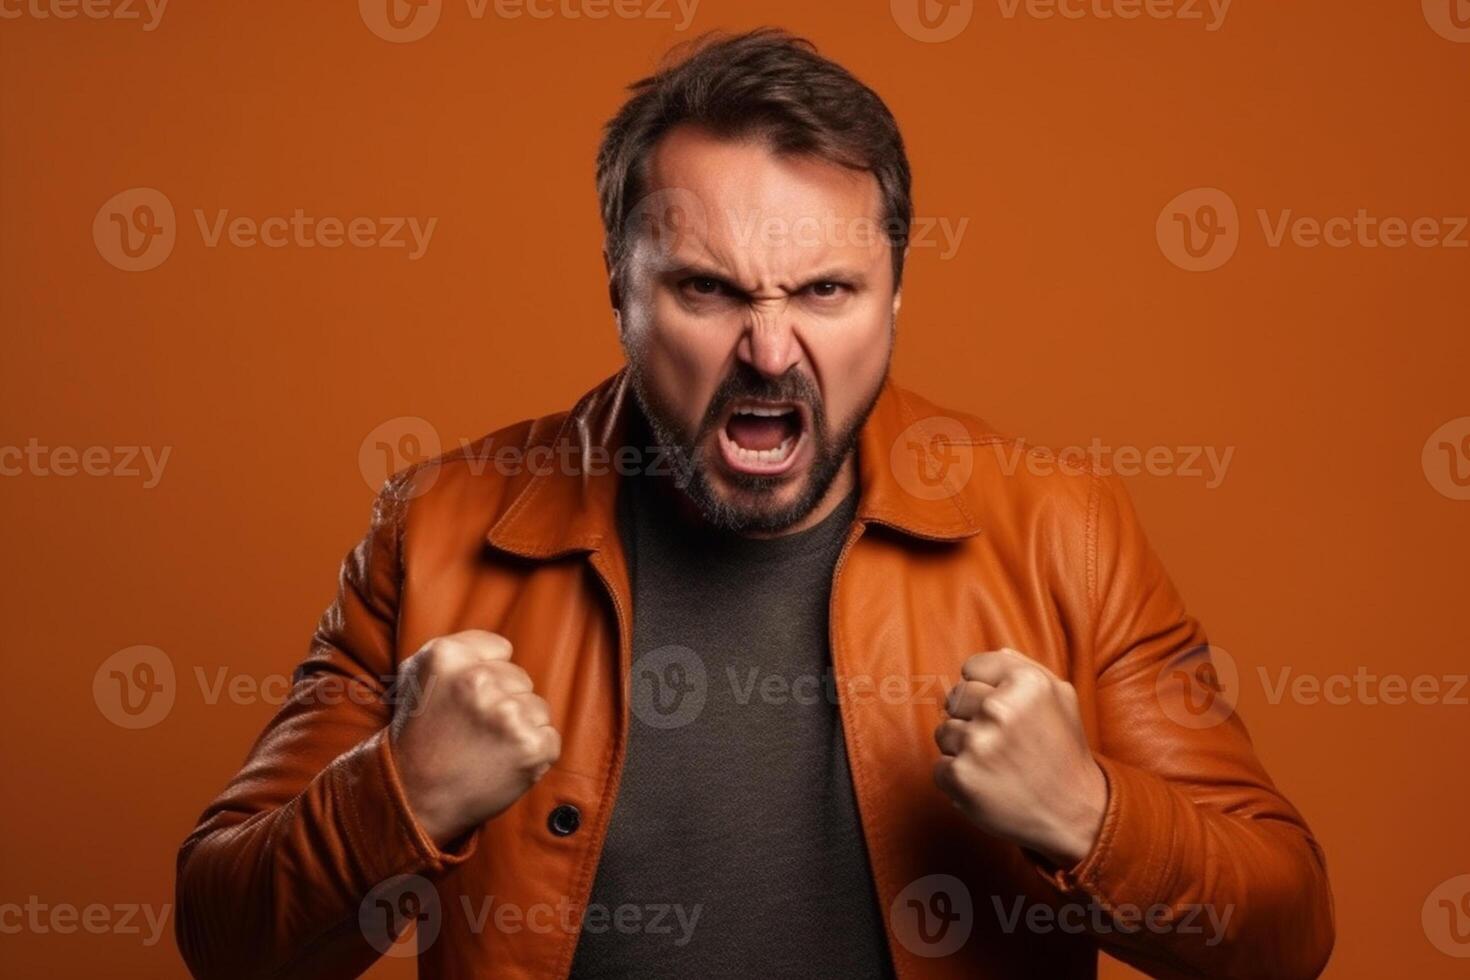 a man on solid color background photoshoot with Anger face experession photo